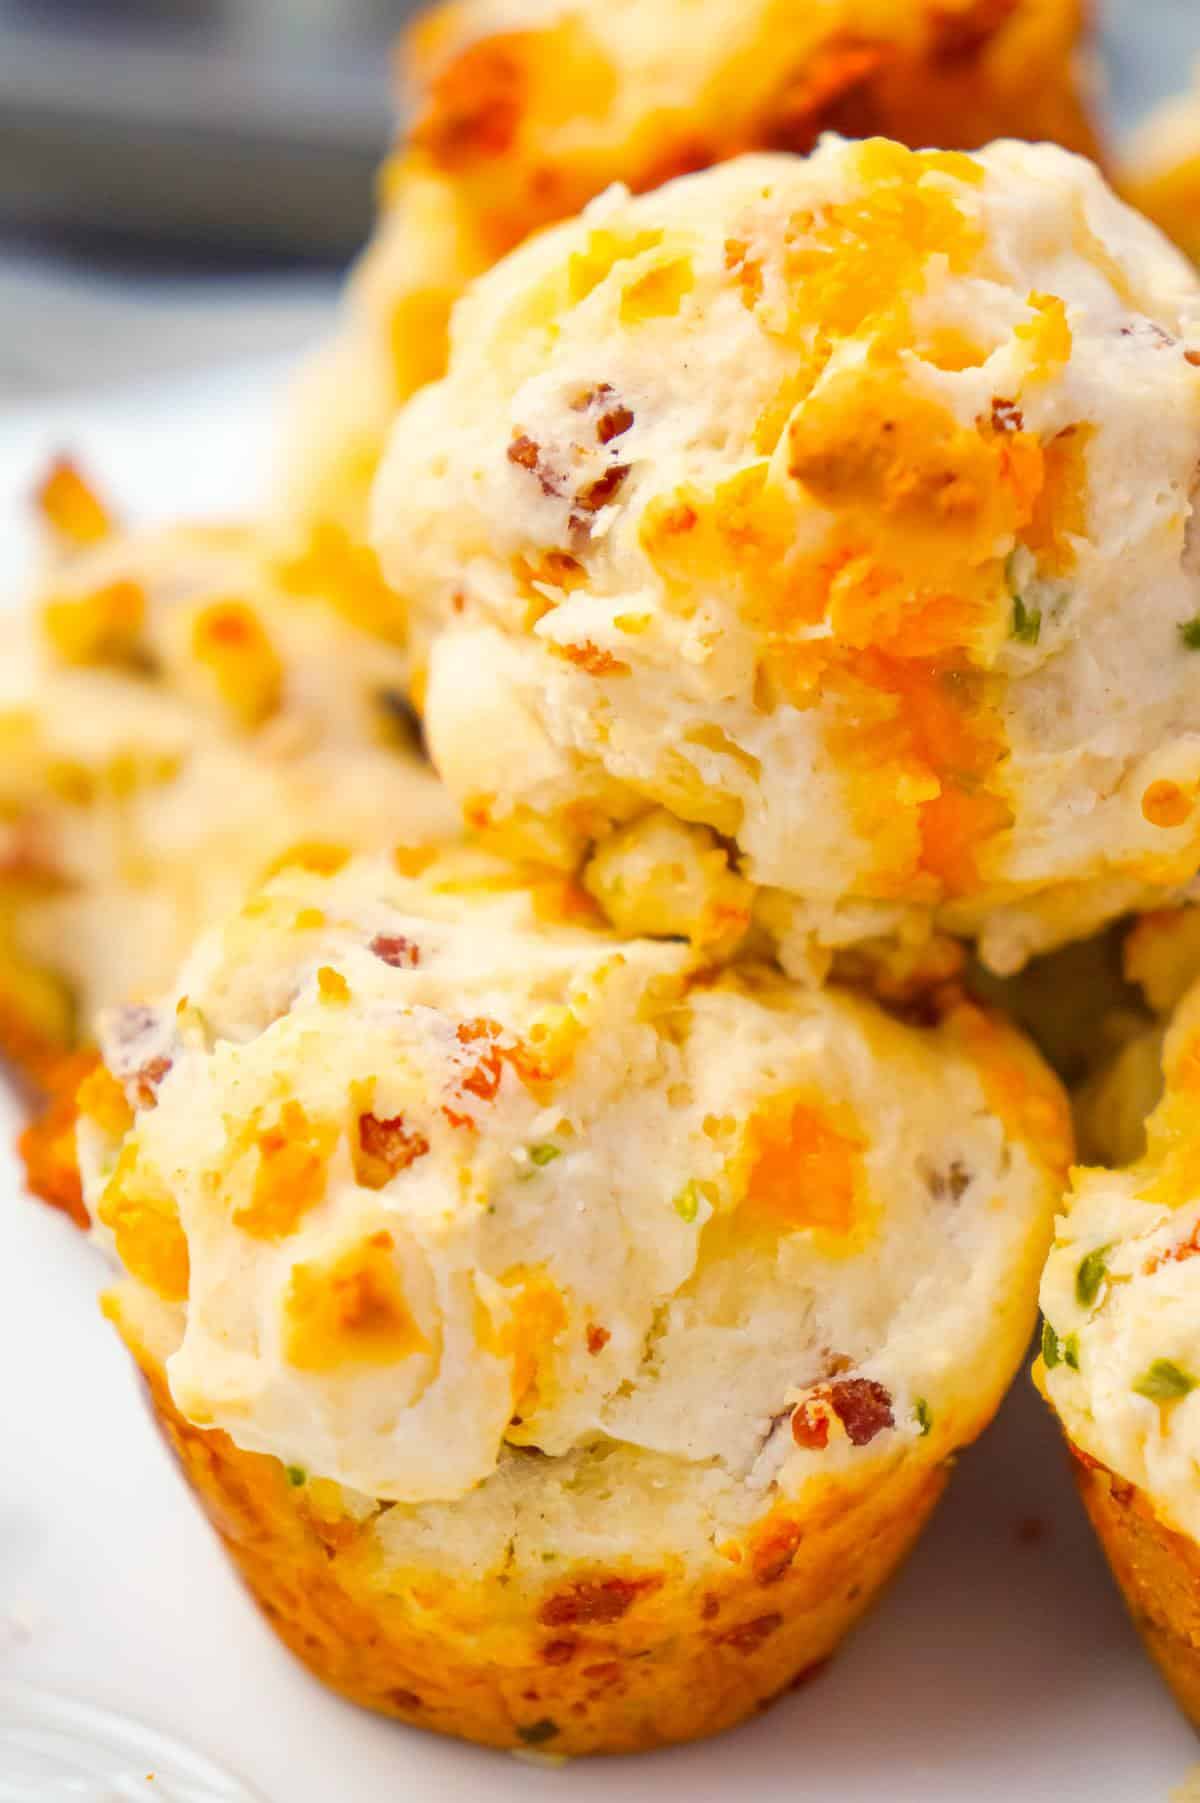 Cheddar Bacon Biscuit Bites are tasty little biscuits made with Bisquick, cheddar cheese and crumbled bacon and baked in mini muffin tins.